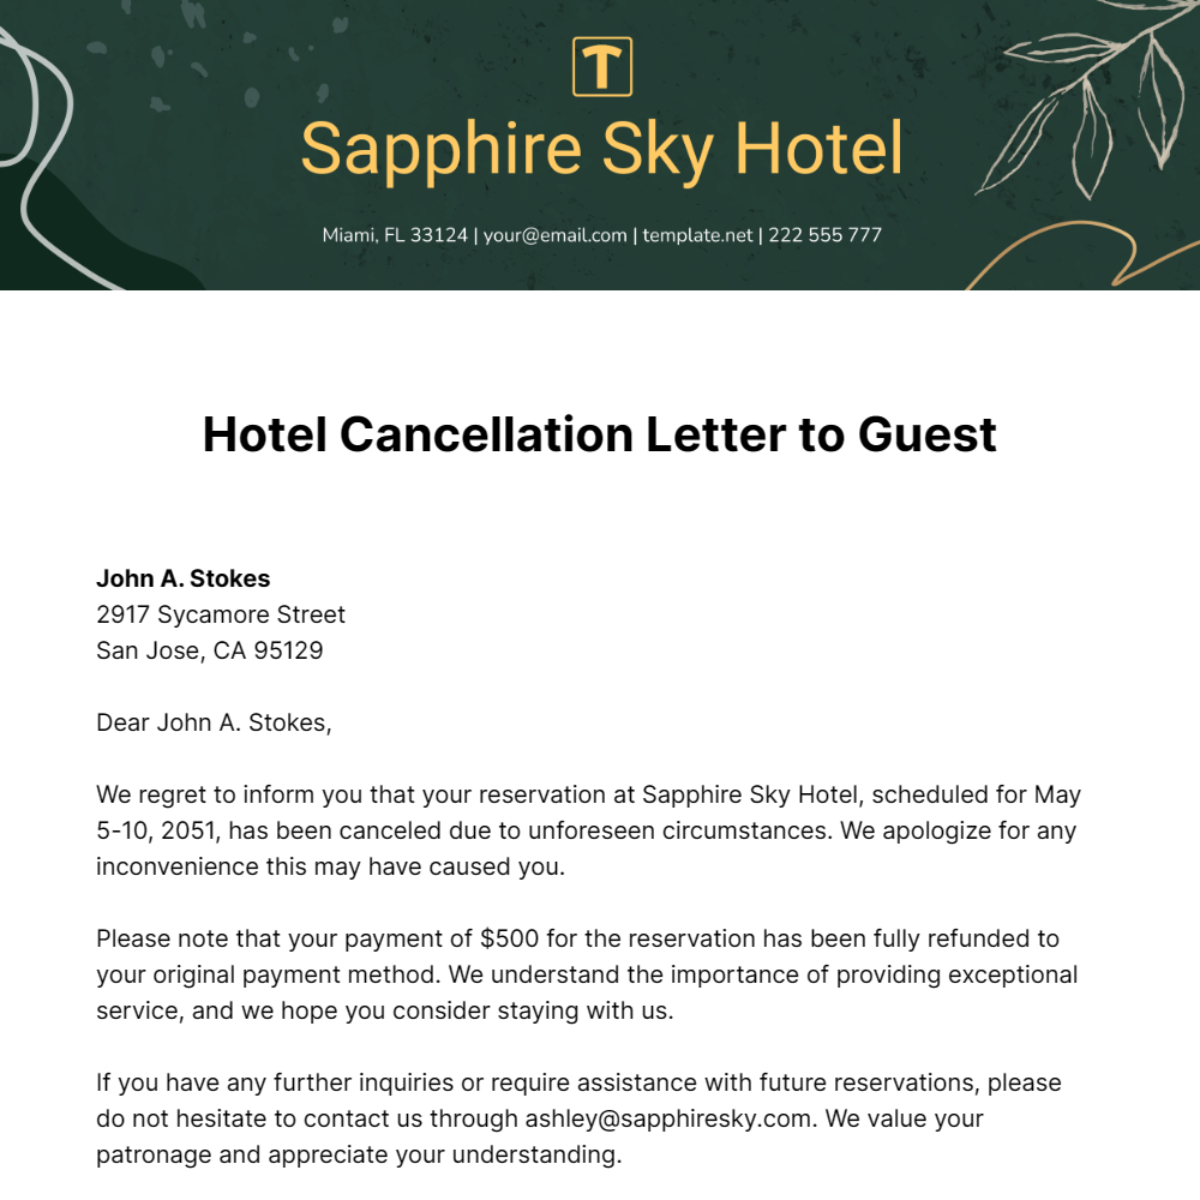 Hotel Cancellation Letter to Guest Template